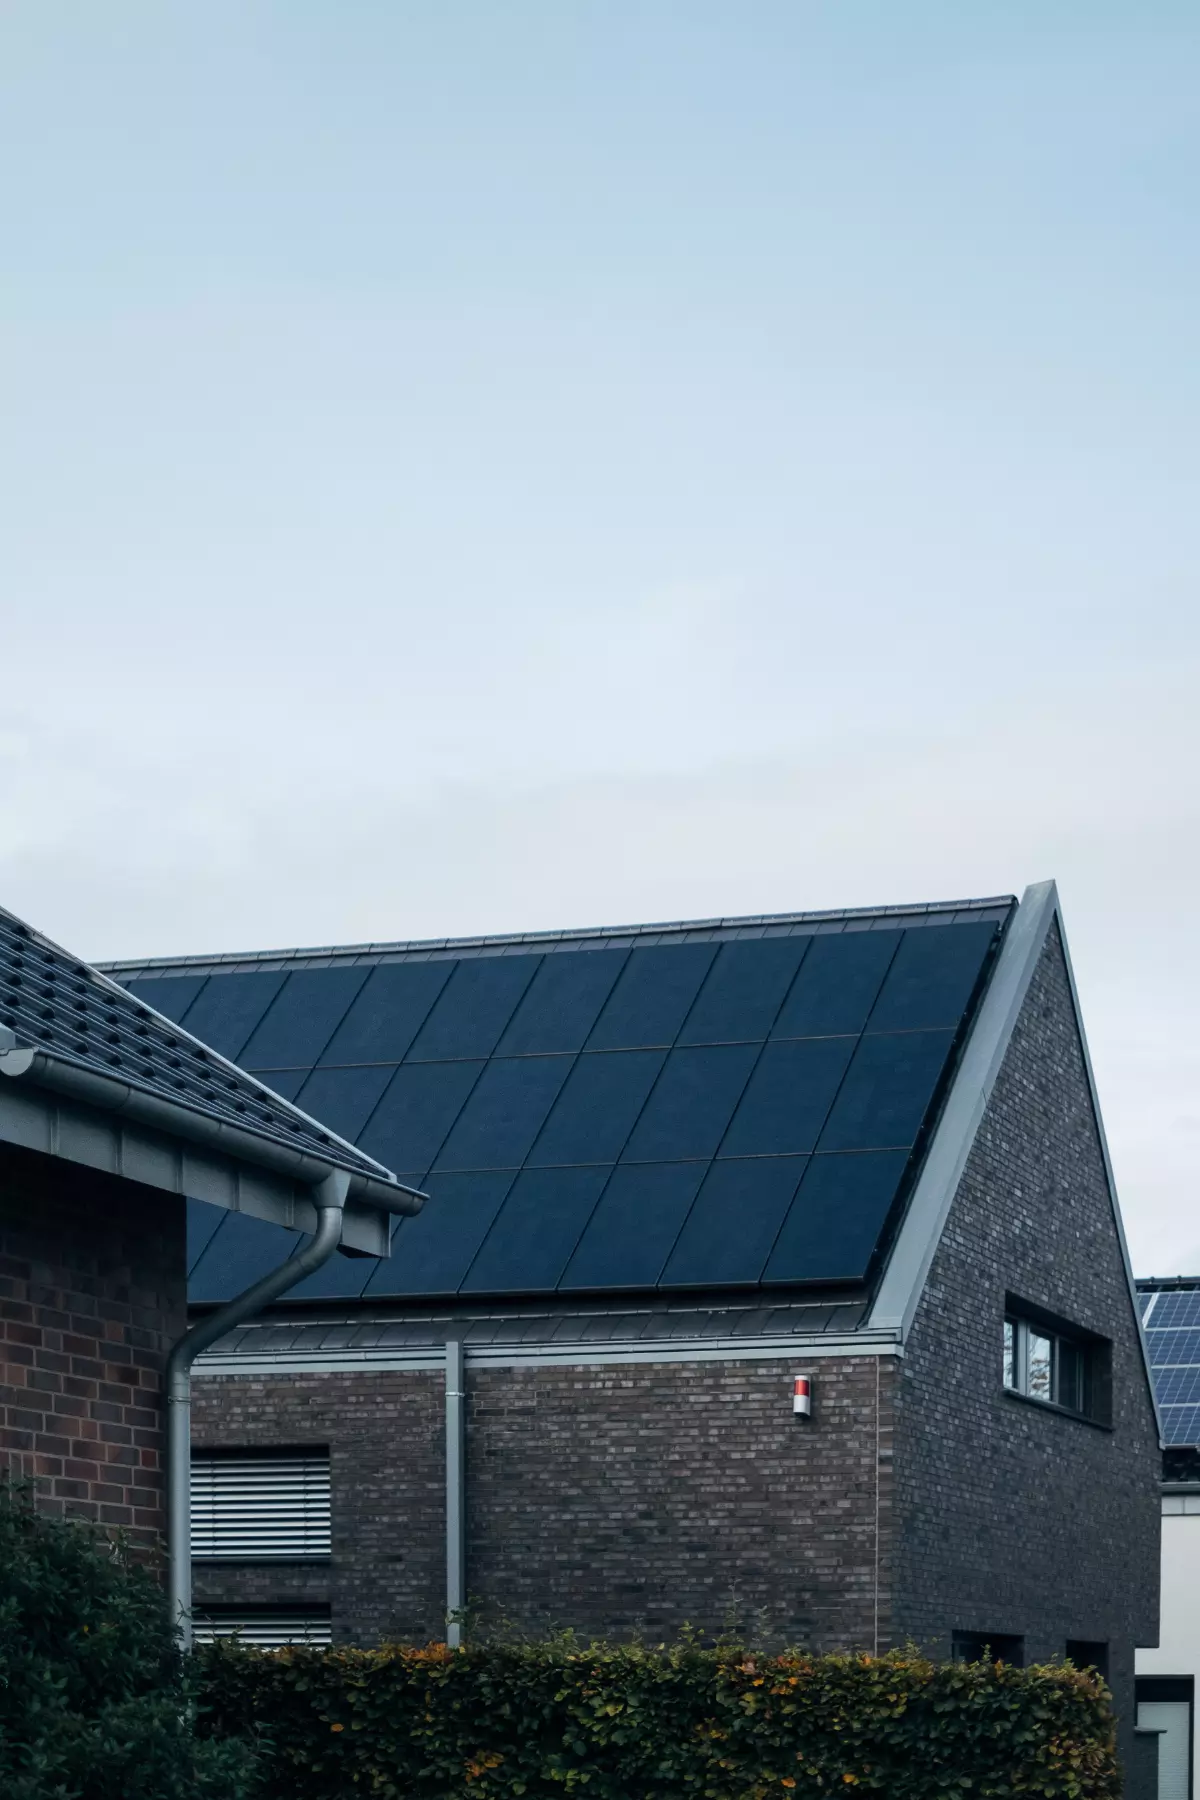 Are Solar Panels Energy Efficient In The UK?